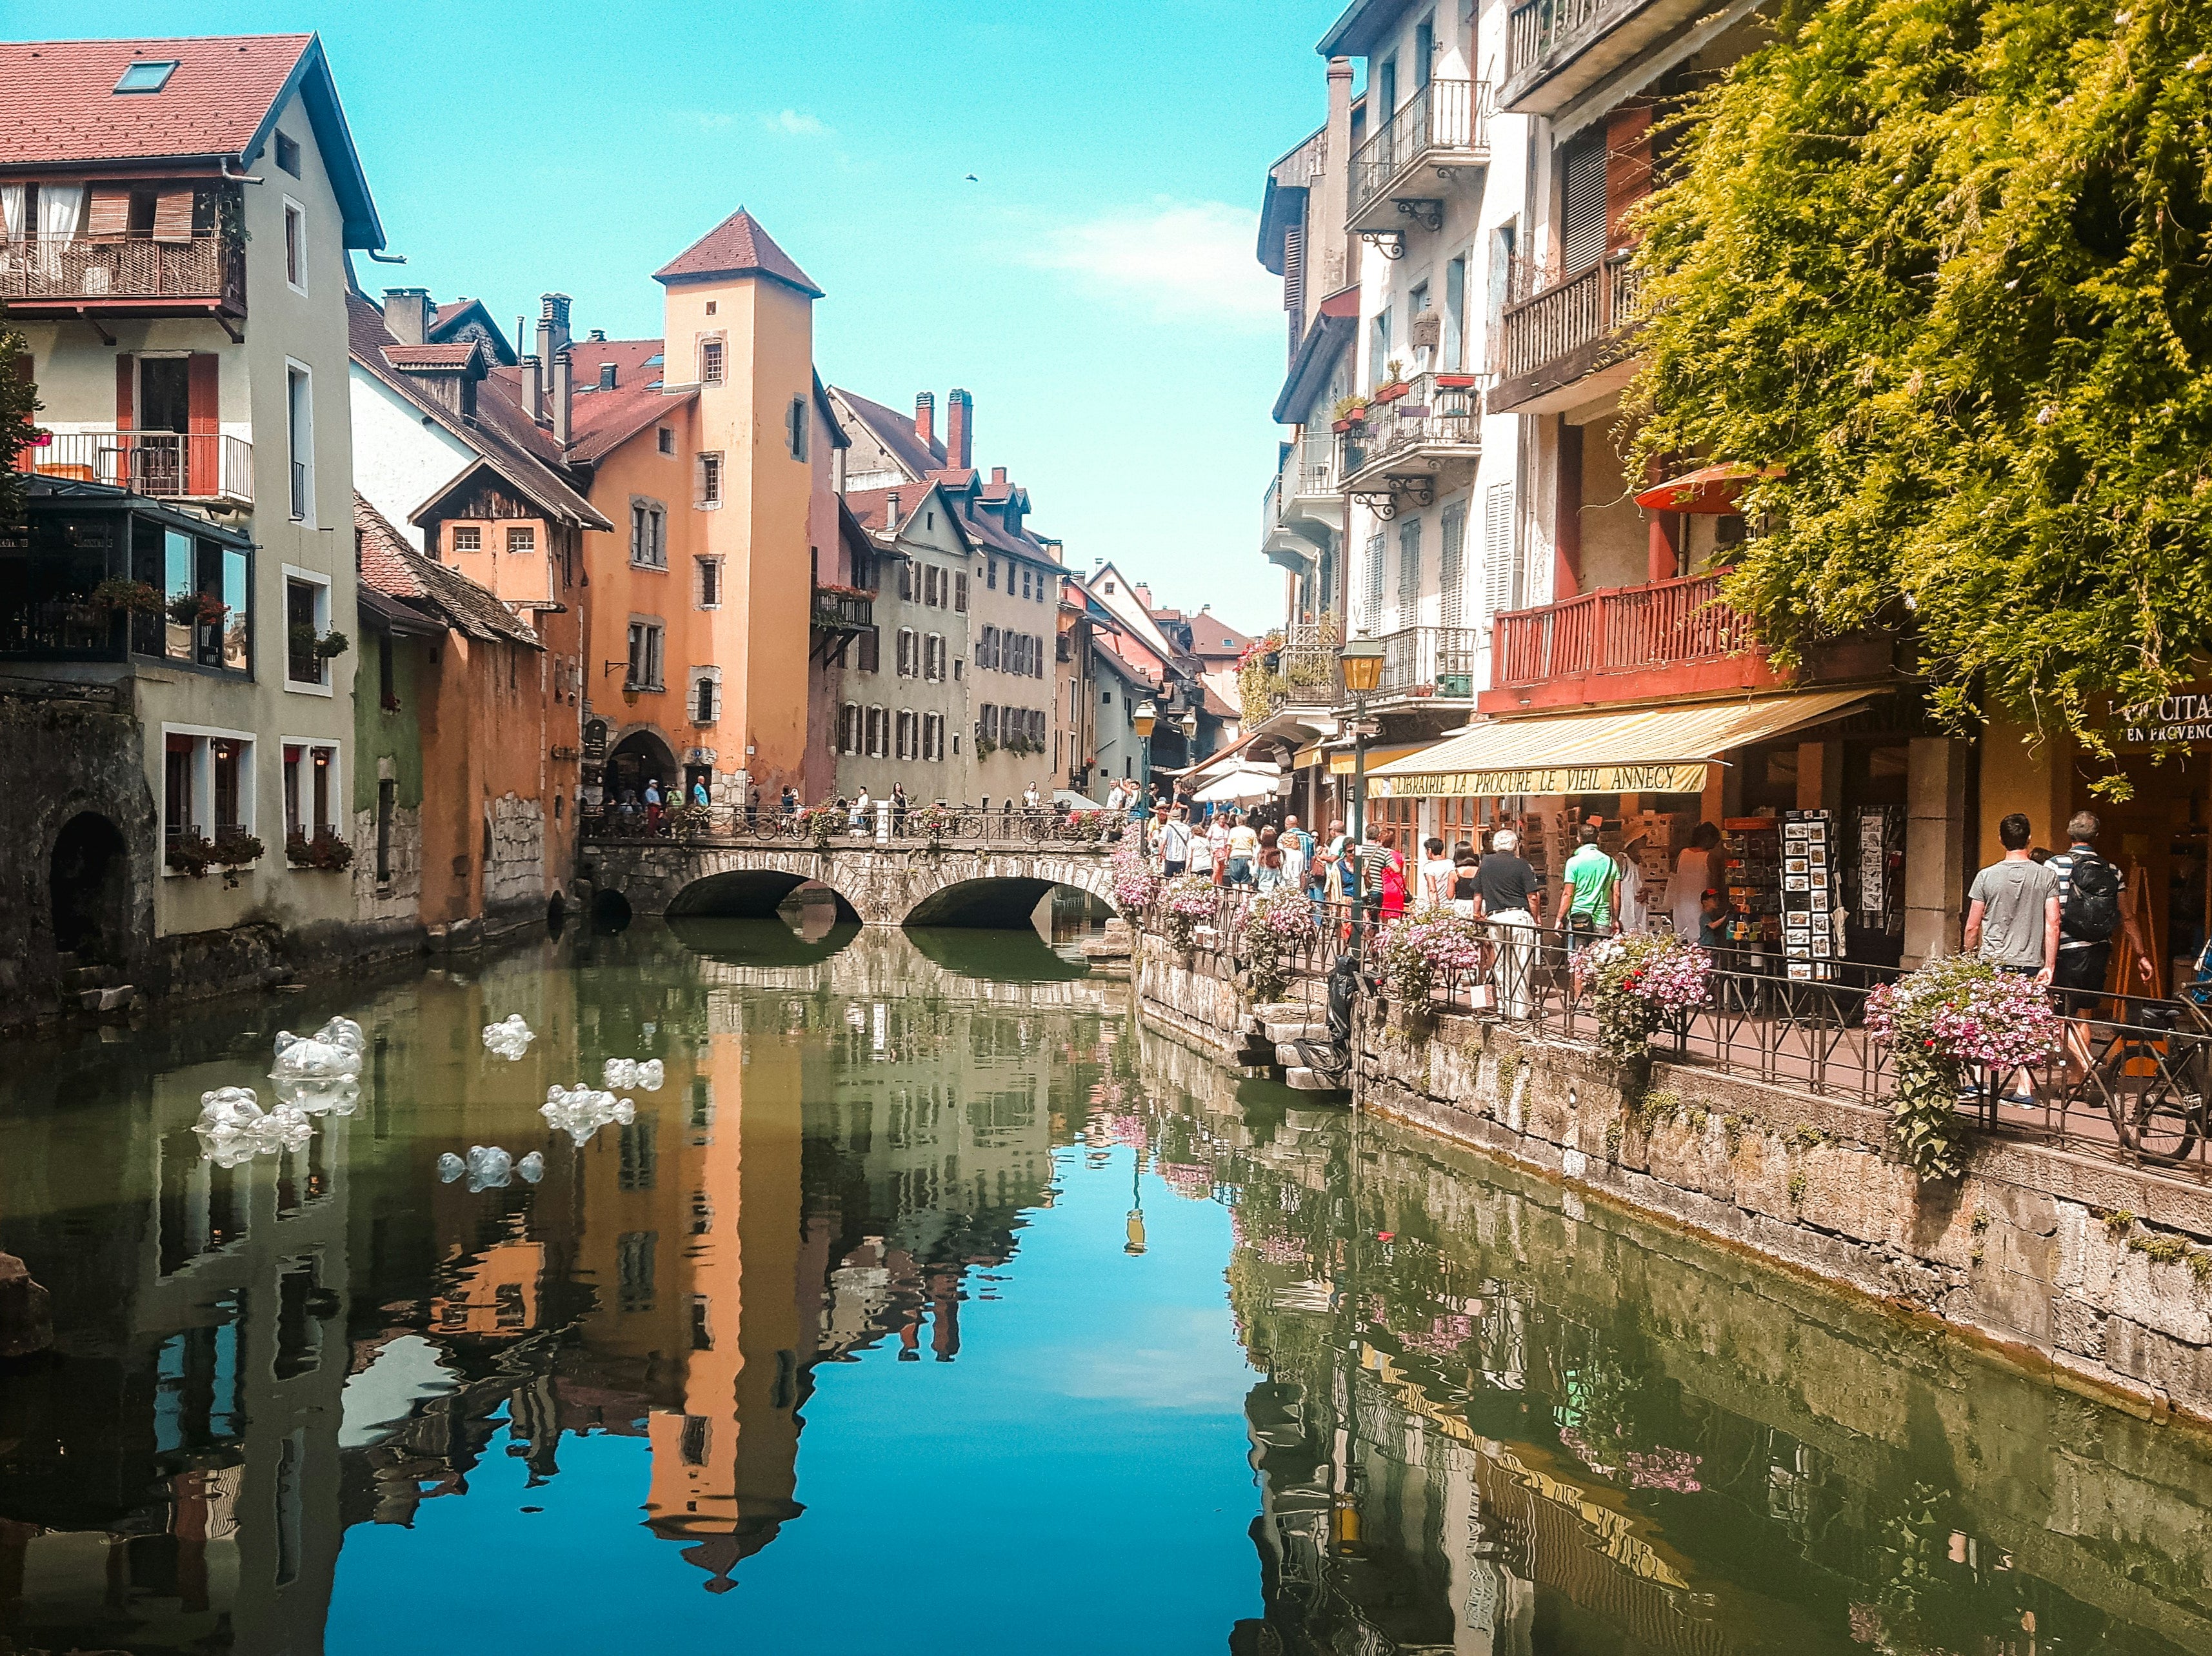 Medieval Venice-esque canals weave Annecy’s waterways